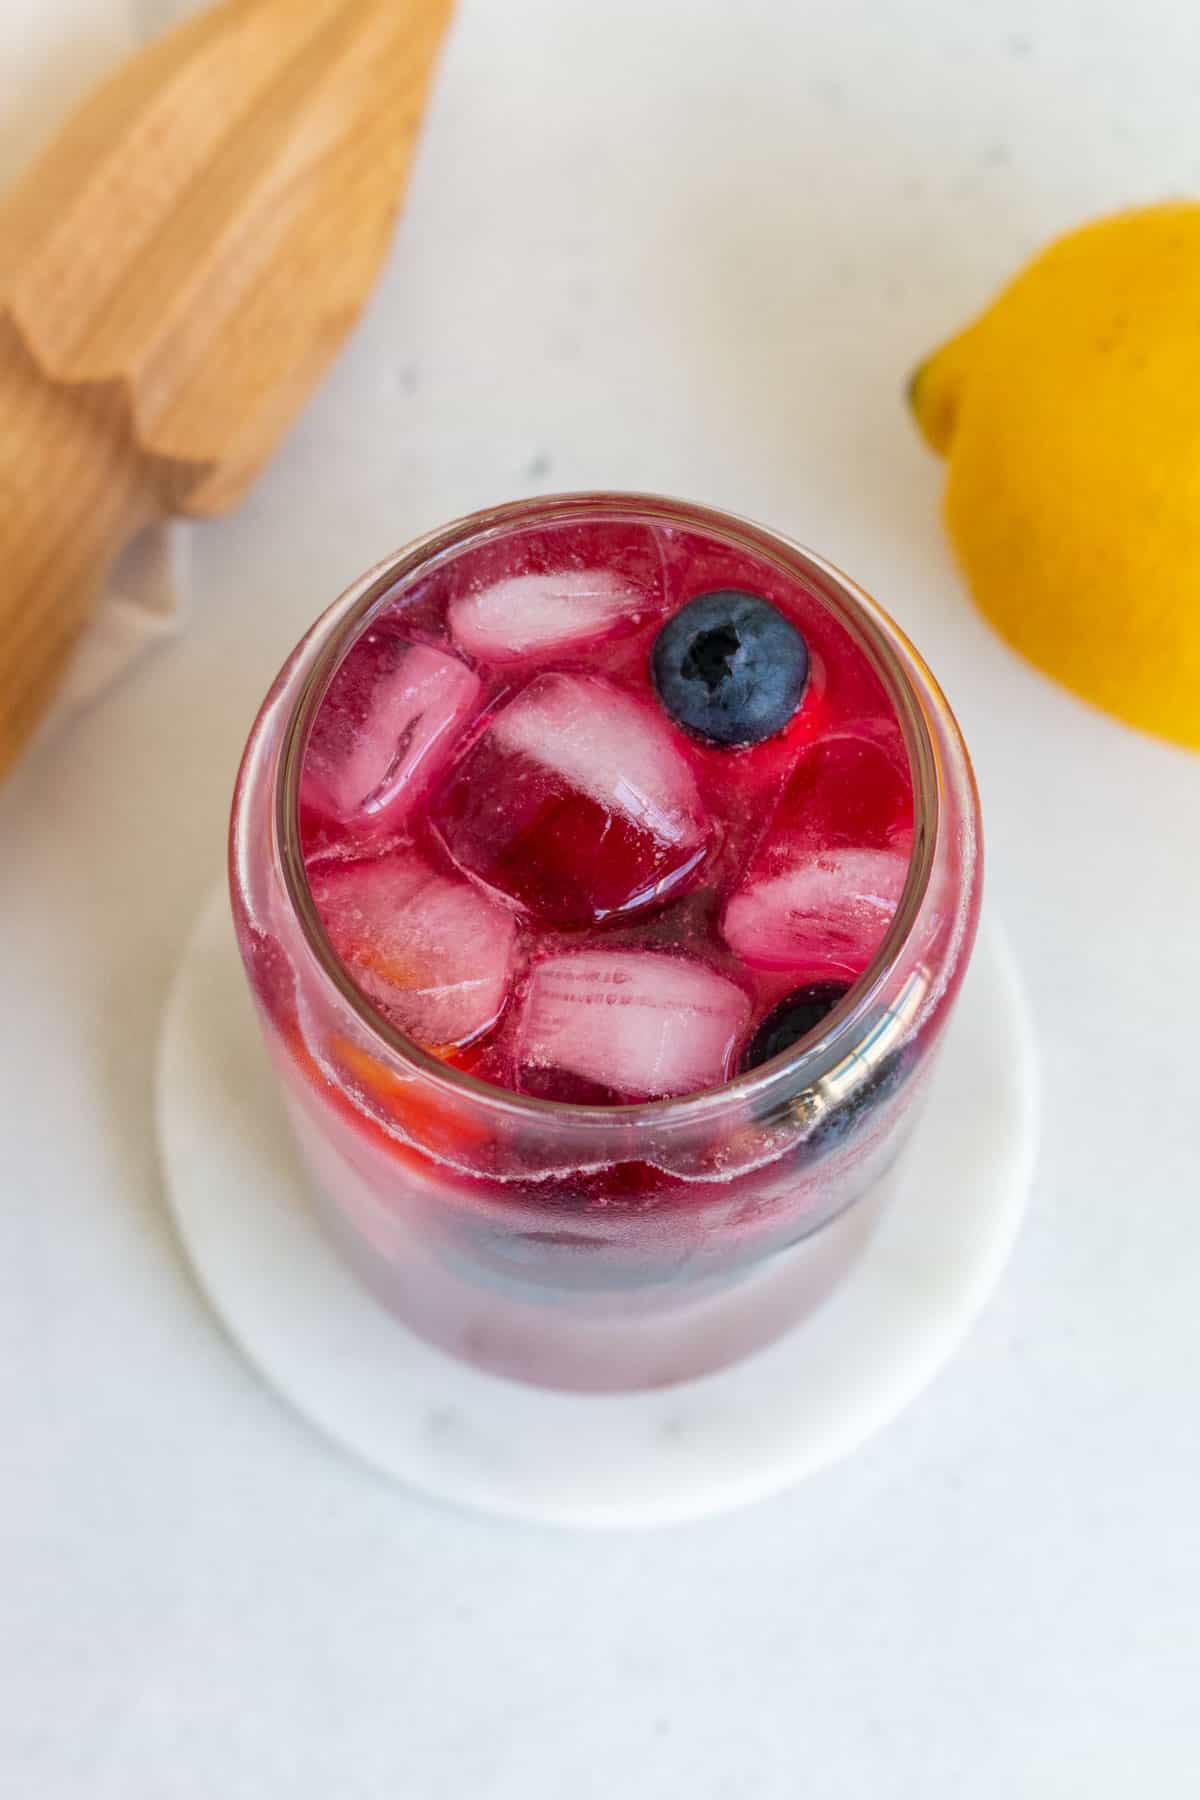 An angled view of a glass of blueberry lemonade with ice and fresh blueberries and lemon slices.